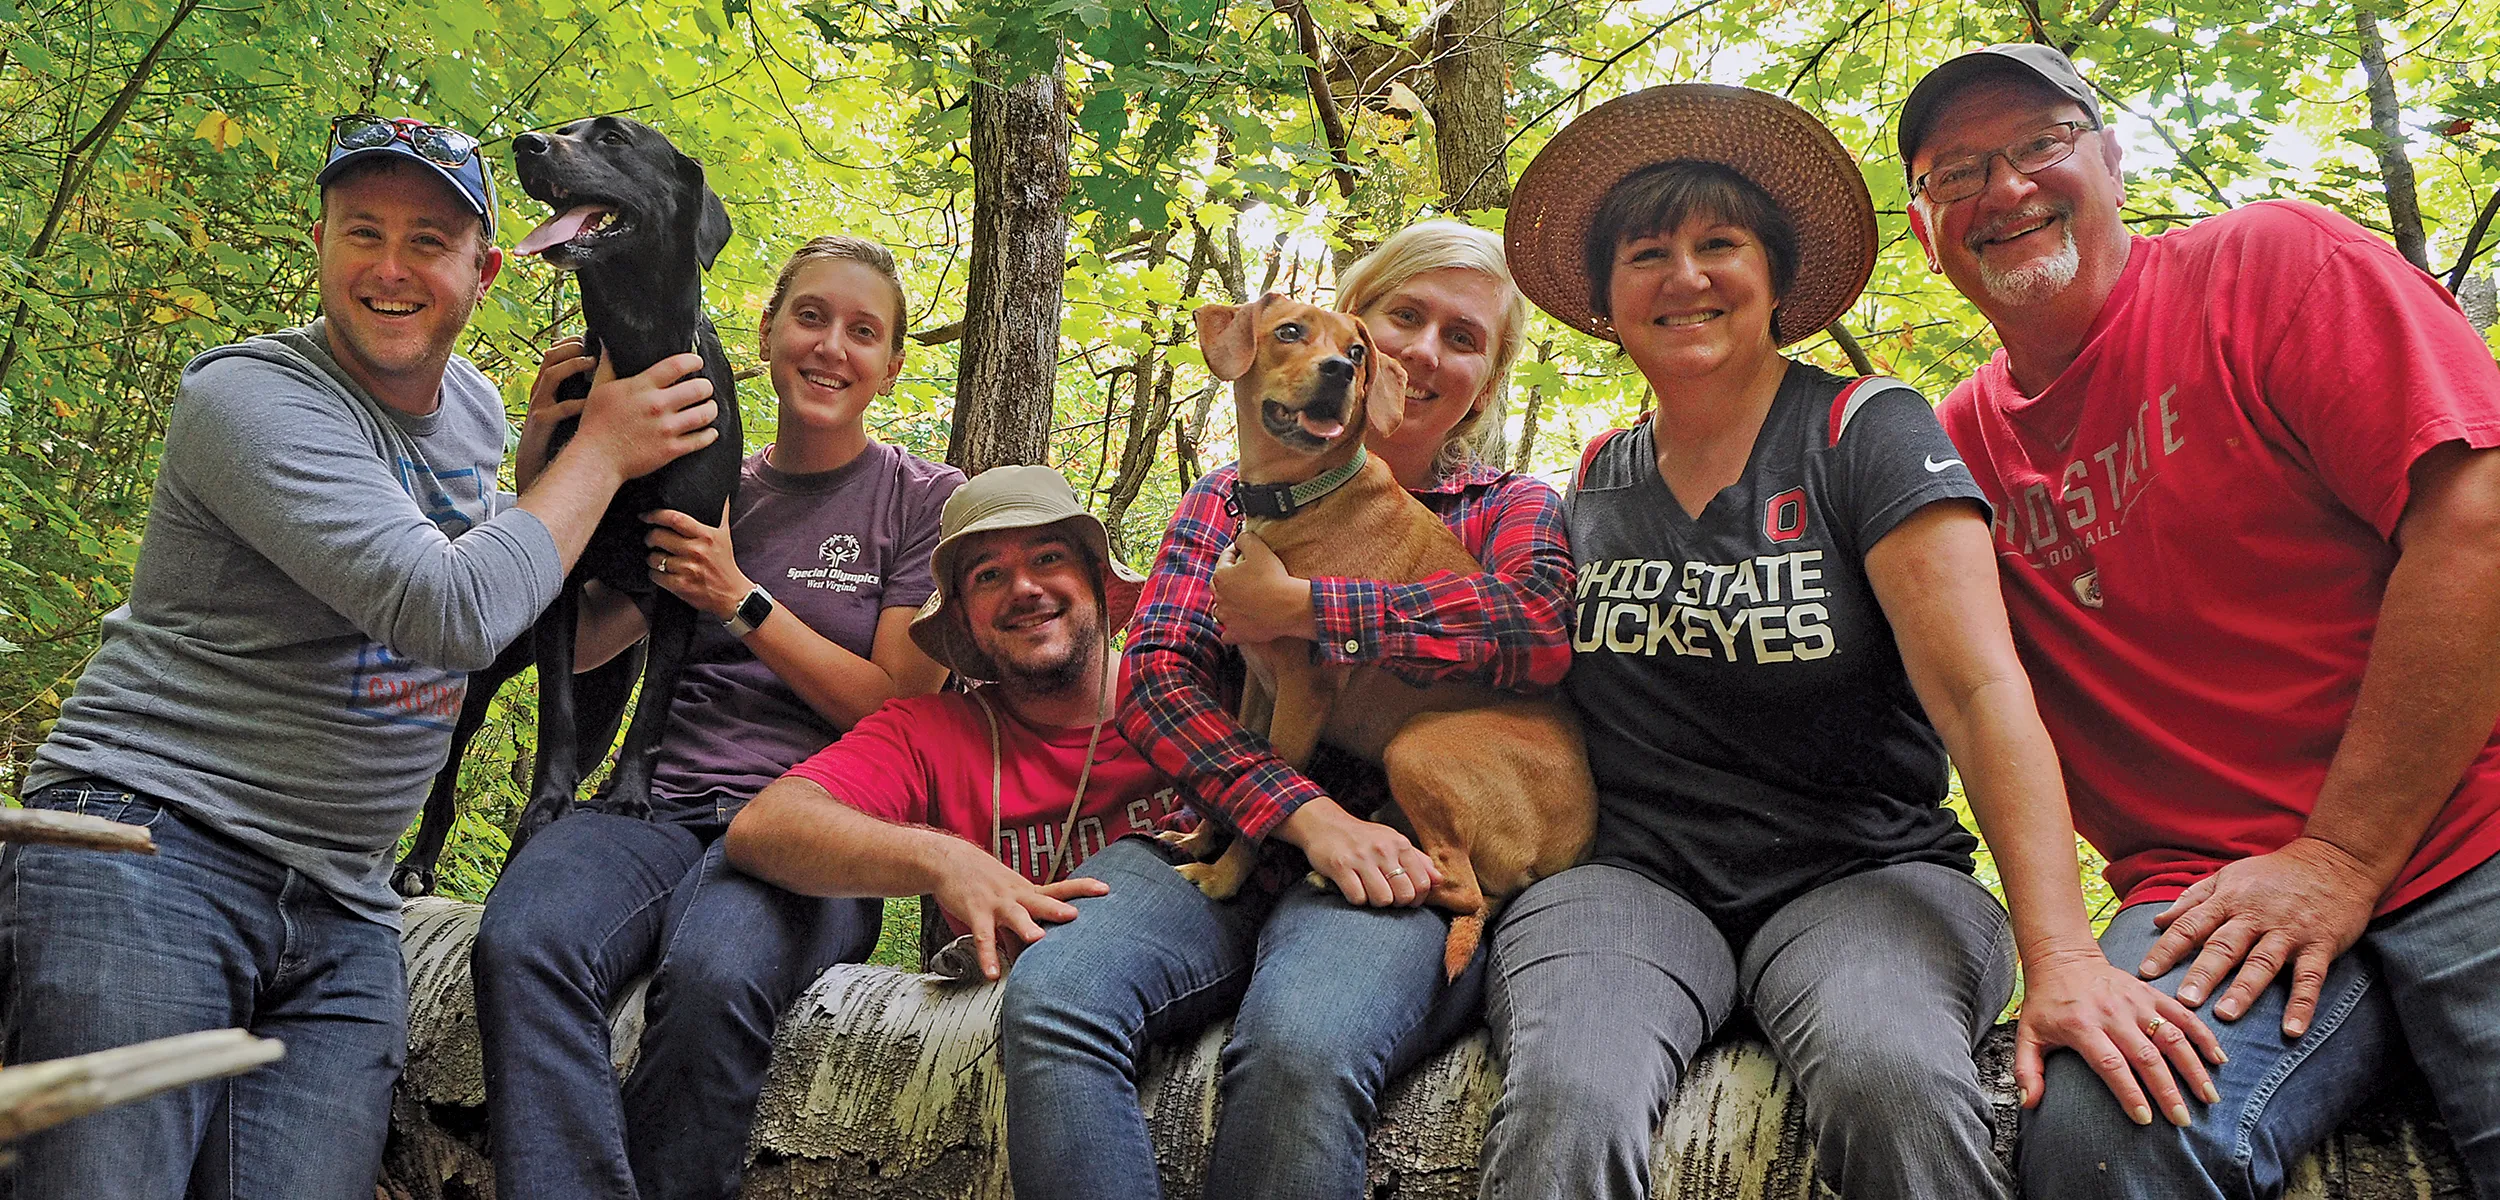 Sitting on a low wall on a hiking trail in the woods, Mary Alice Casey and her family pose with their pets. Both of her grown children and their spouses brought their dogs for their hike, and her husband, an alumnus, wears an Ohio State T-shirt. The whole family looks like they’re enjoying themselves.